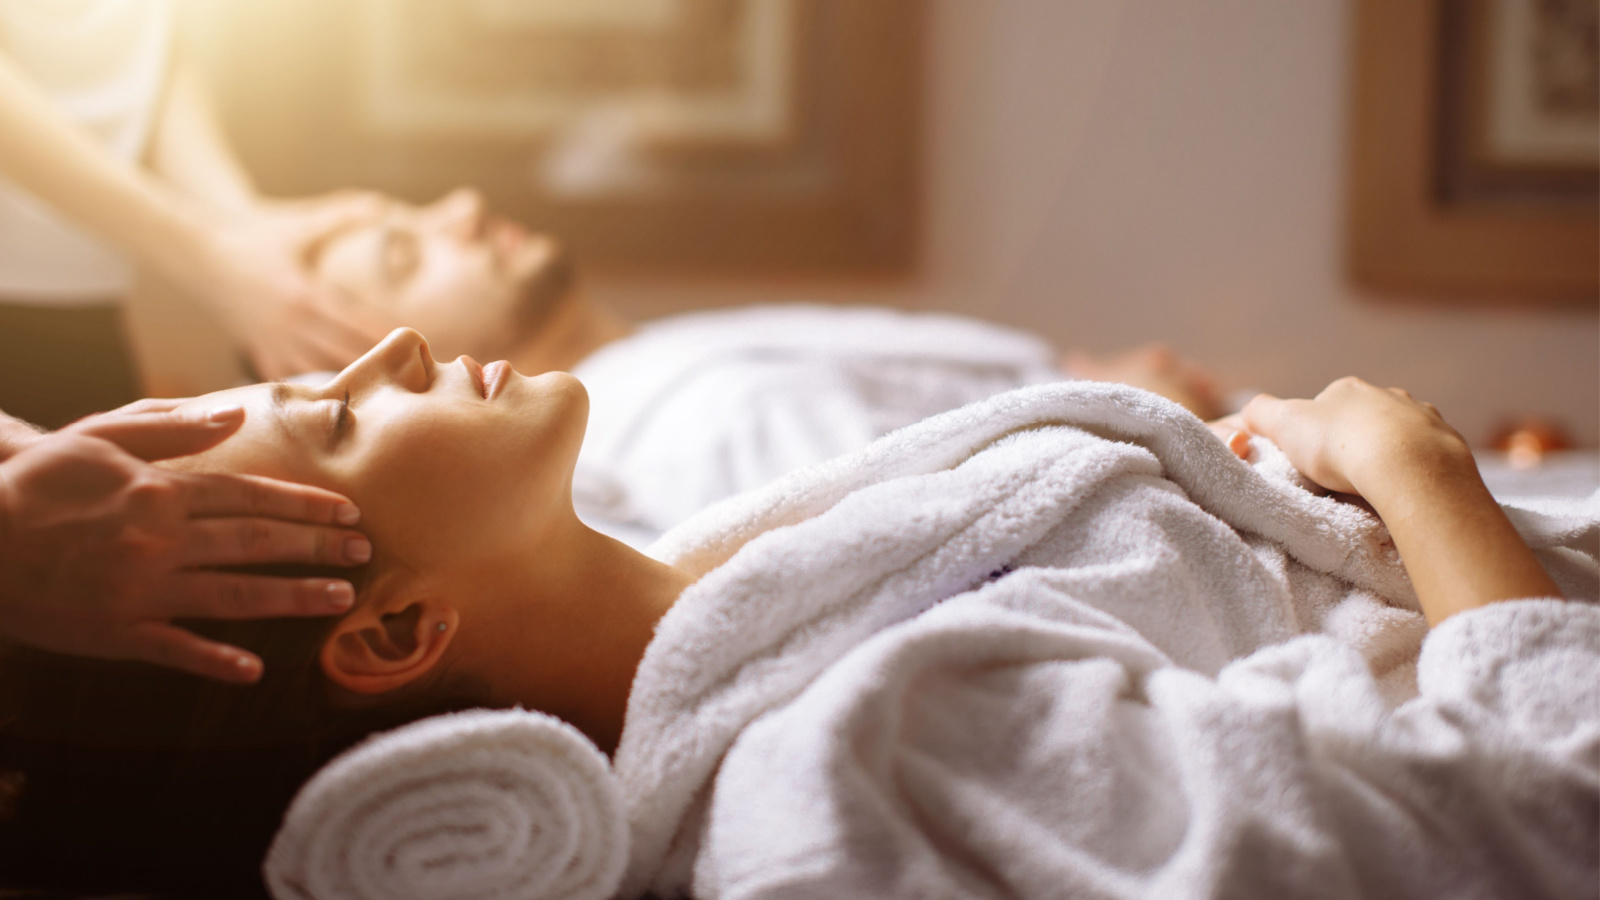 UfaBizPhoto/Shutterstock<p>Indulge in a weekend of pampering and relaxation at a luxurious spa resort. With massages, facials, and wellness treatments, it's an oasis of calm for couples seeking tranquility. Let the stress melt away as you immerse yourselves in a world of serenity and comfort.</p>